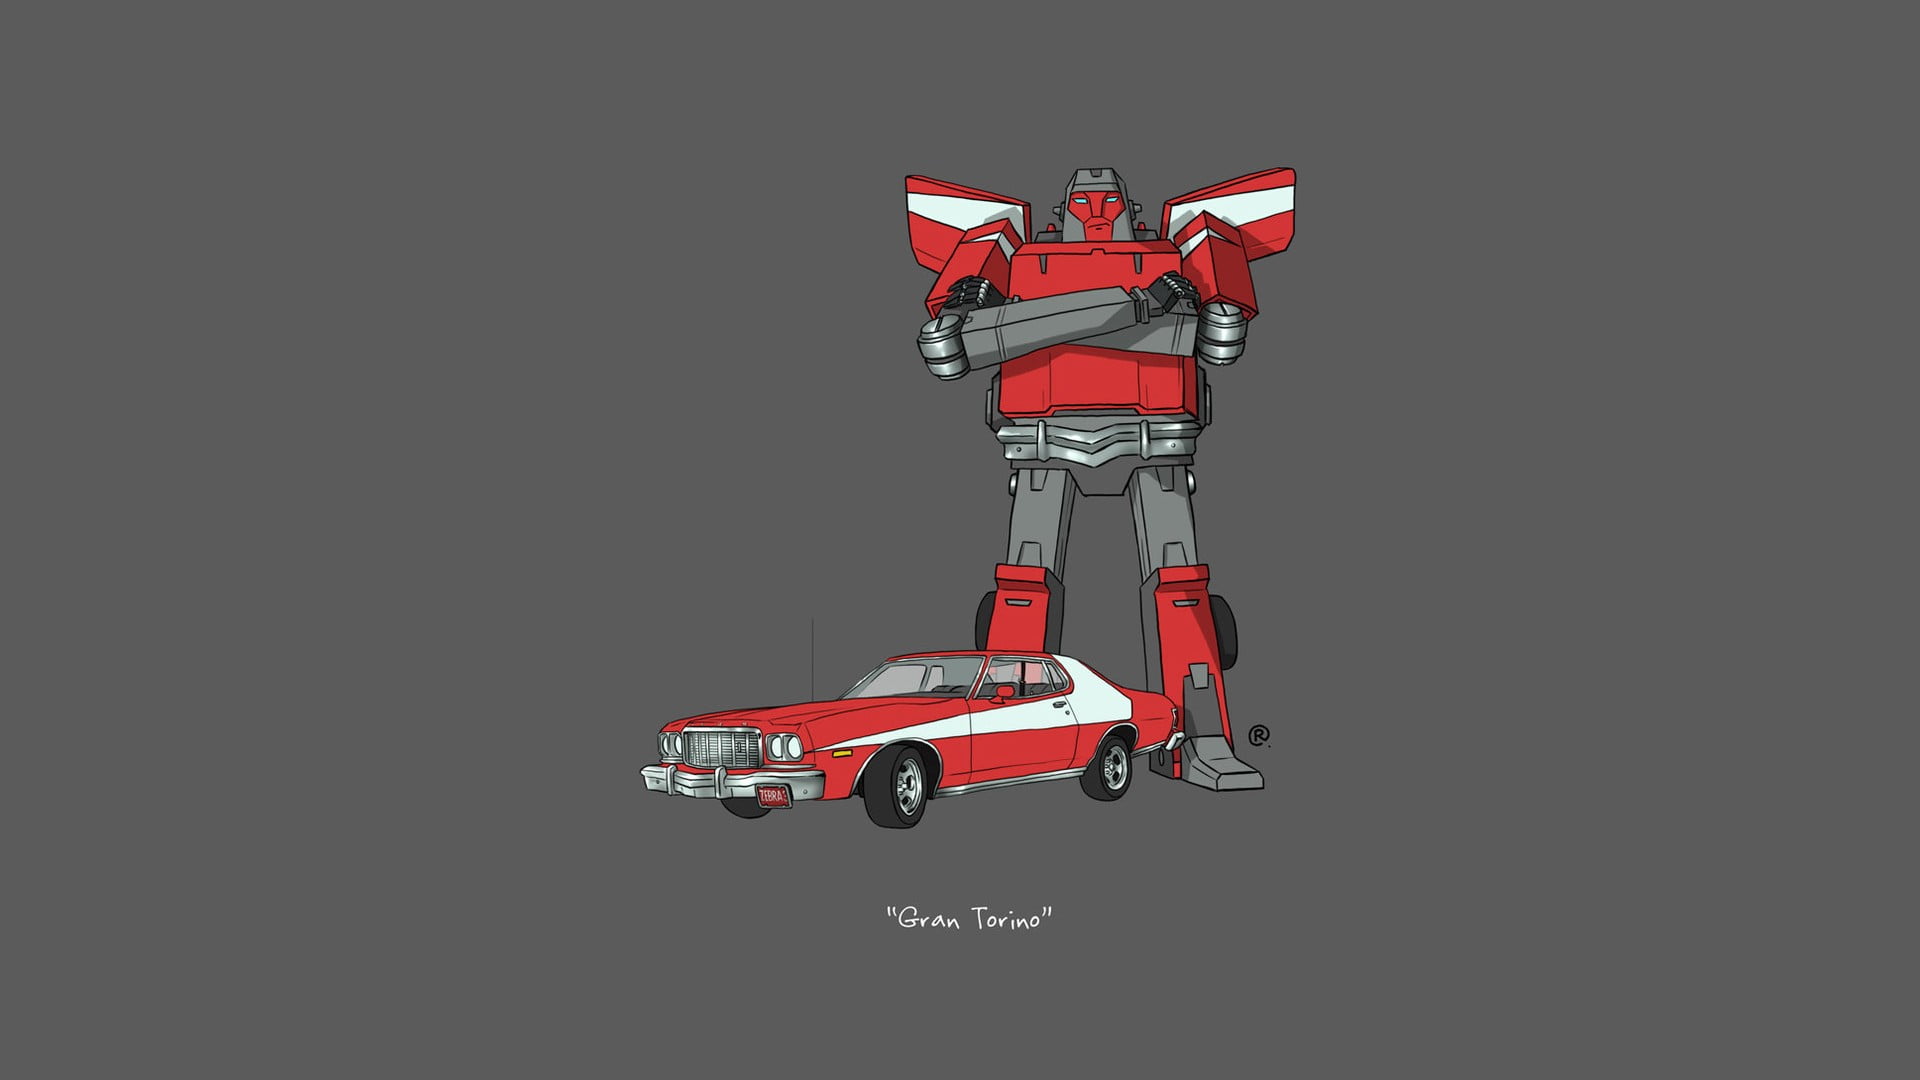 red and gray robot toy, car, Transformers, minimalism